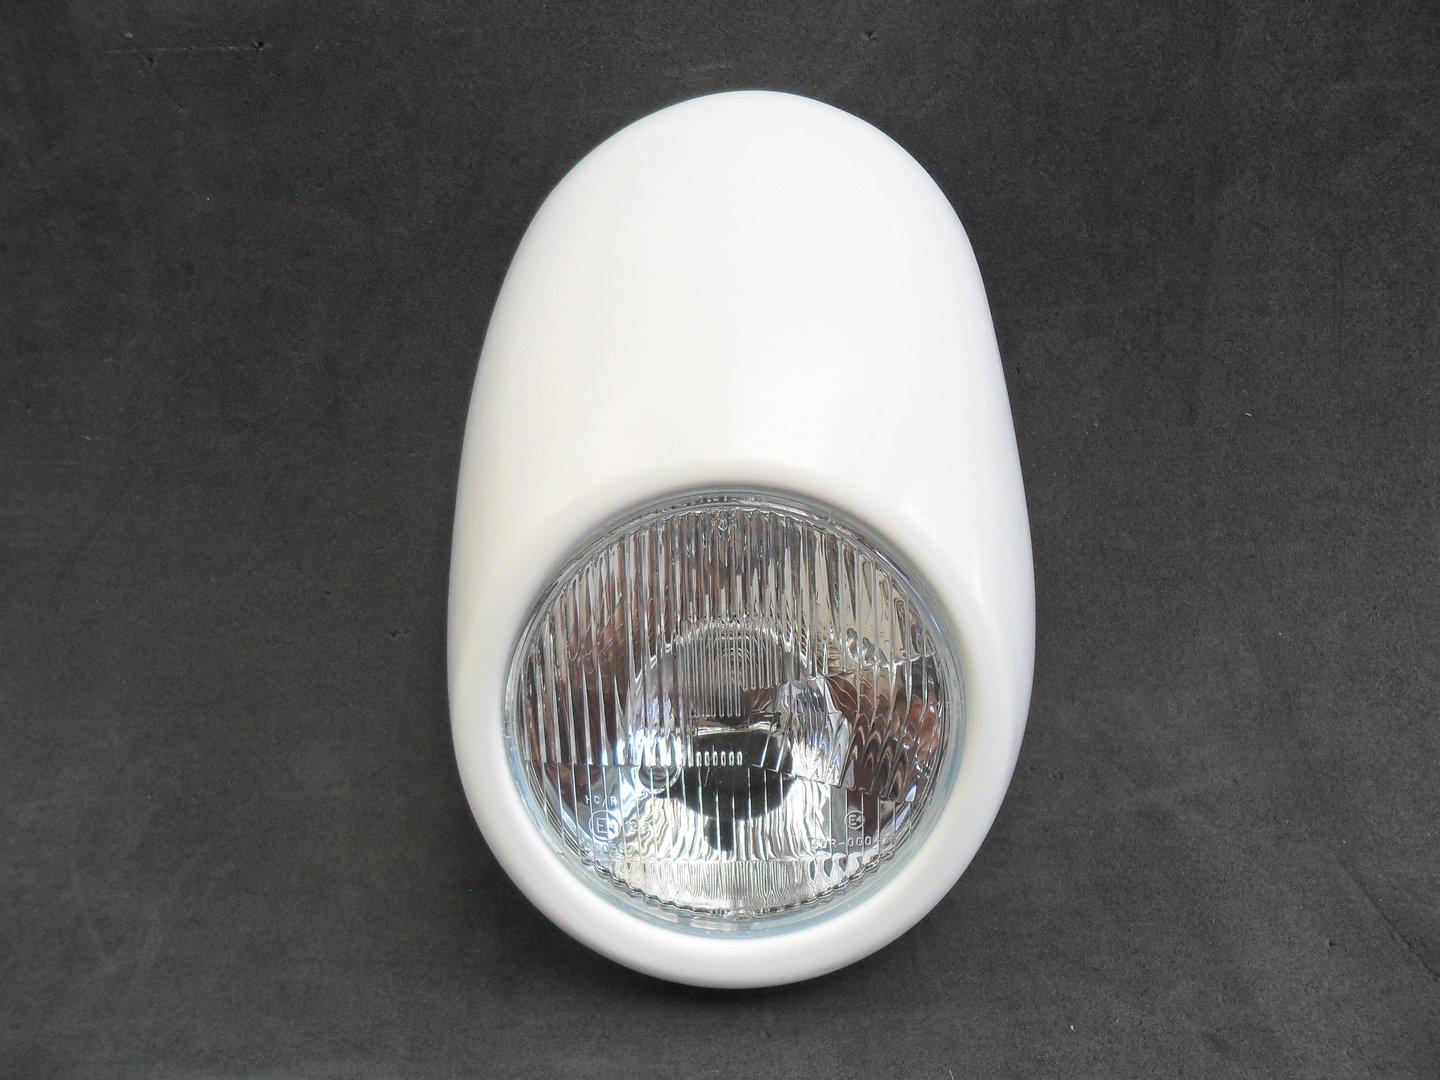 cafe racer lamp mask with headlight